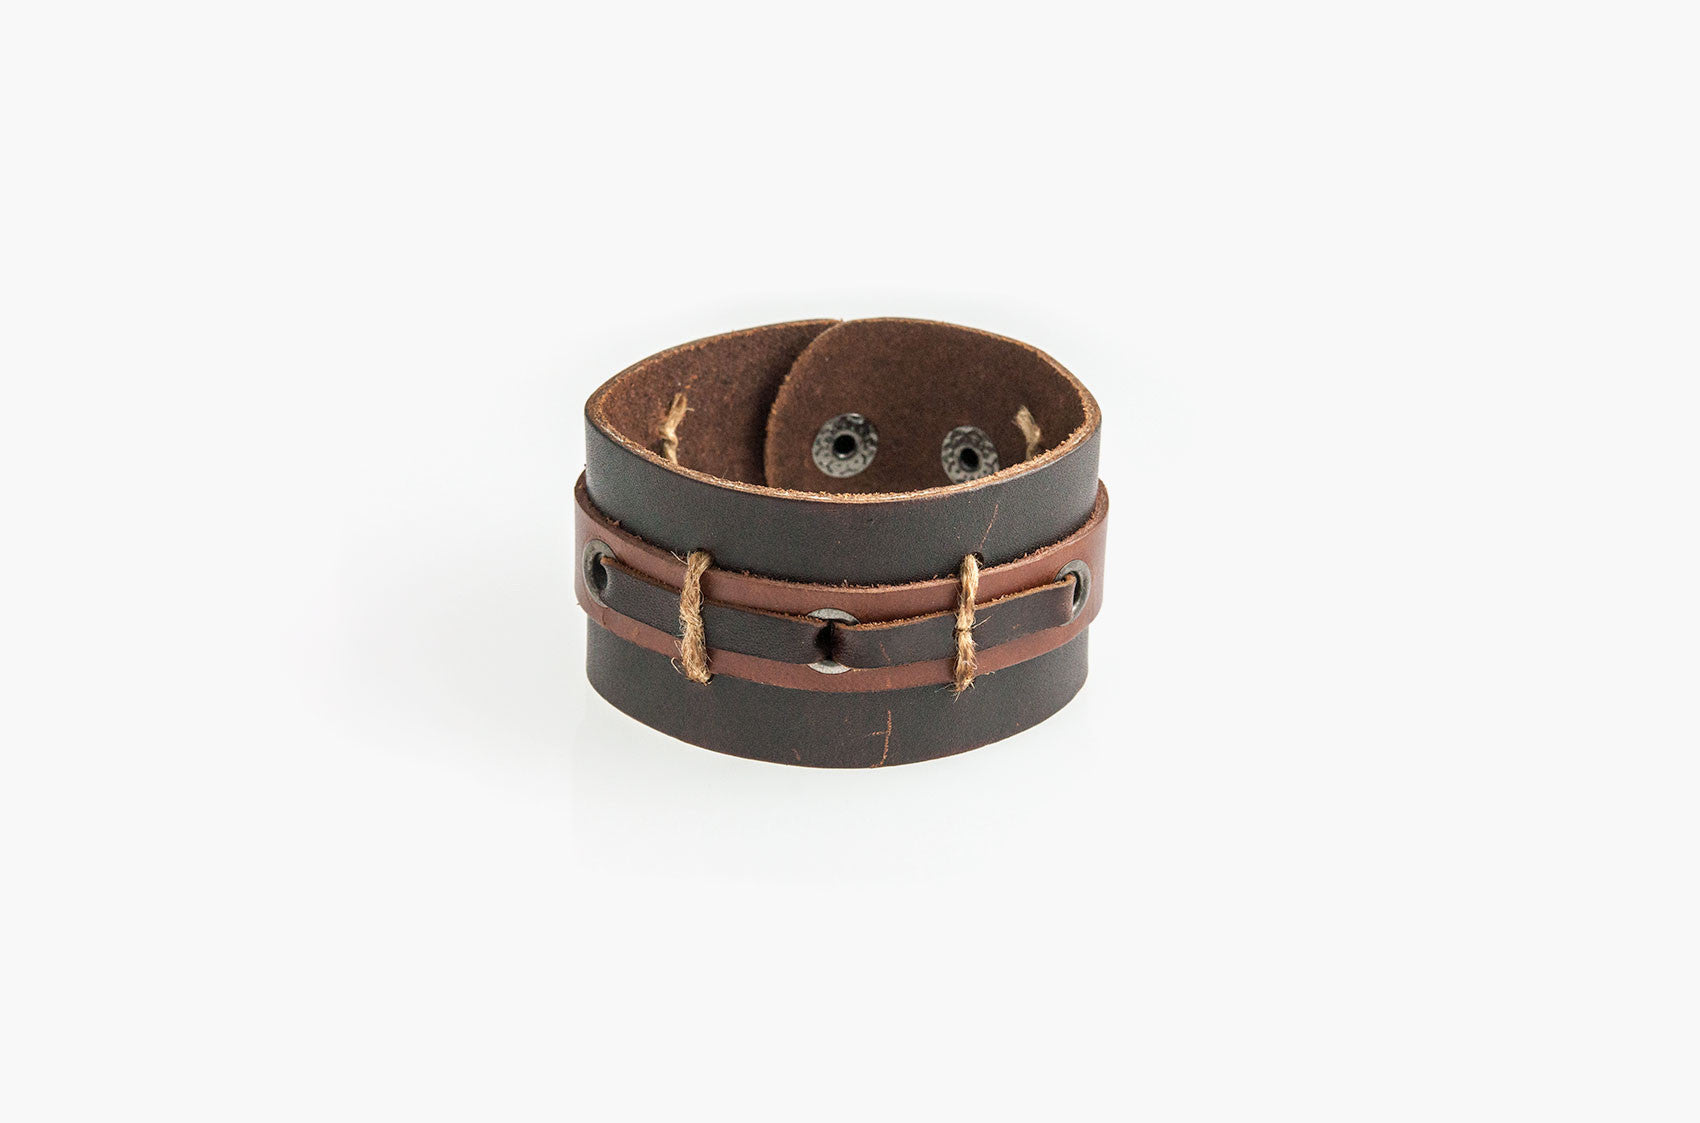 Leather and rope wide wristband bracelet